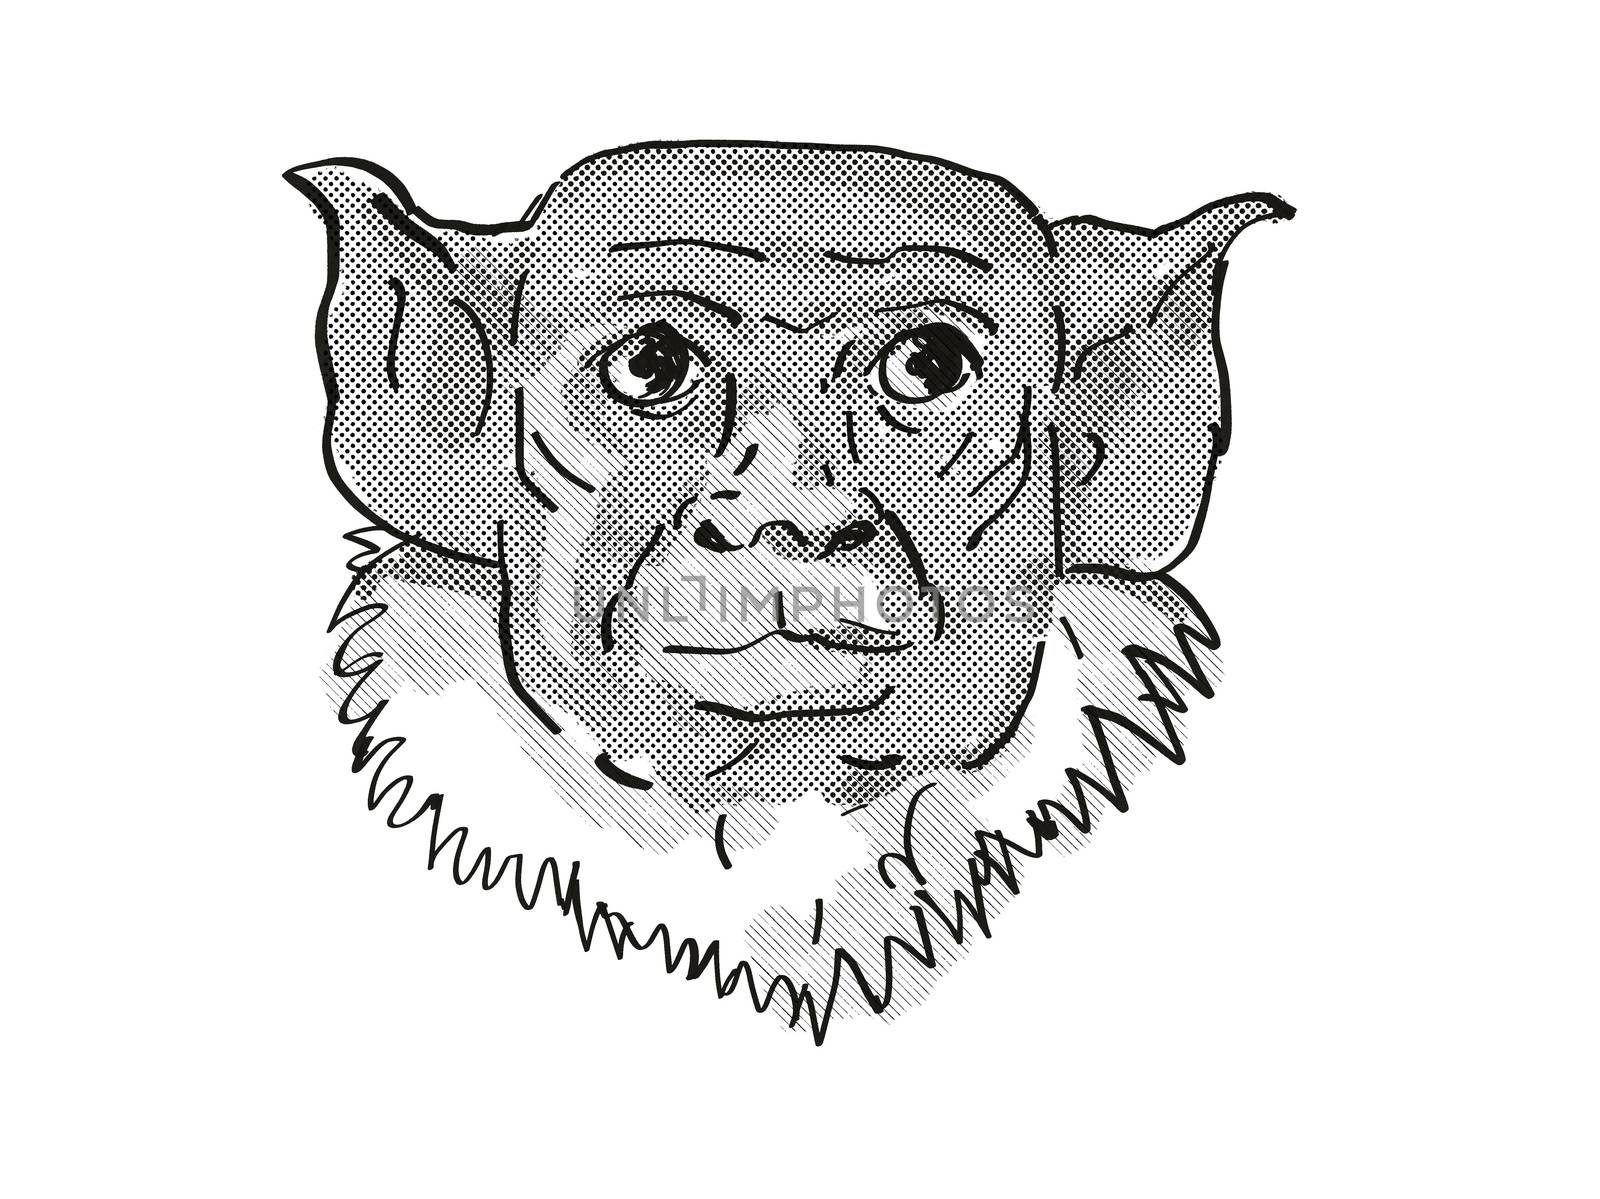 Retro cartoon style drawing of head of a pied tamarin, a small species of monkey in the rainforest of Brazil and an endangered wildlife species on isolated white background done in black and white.